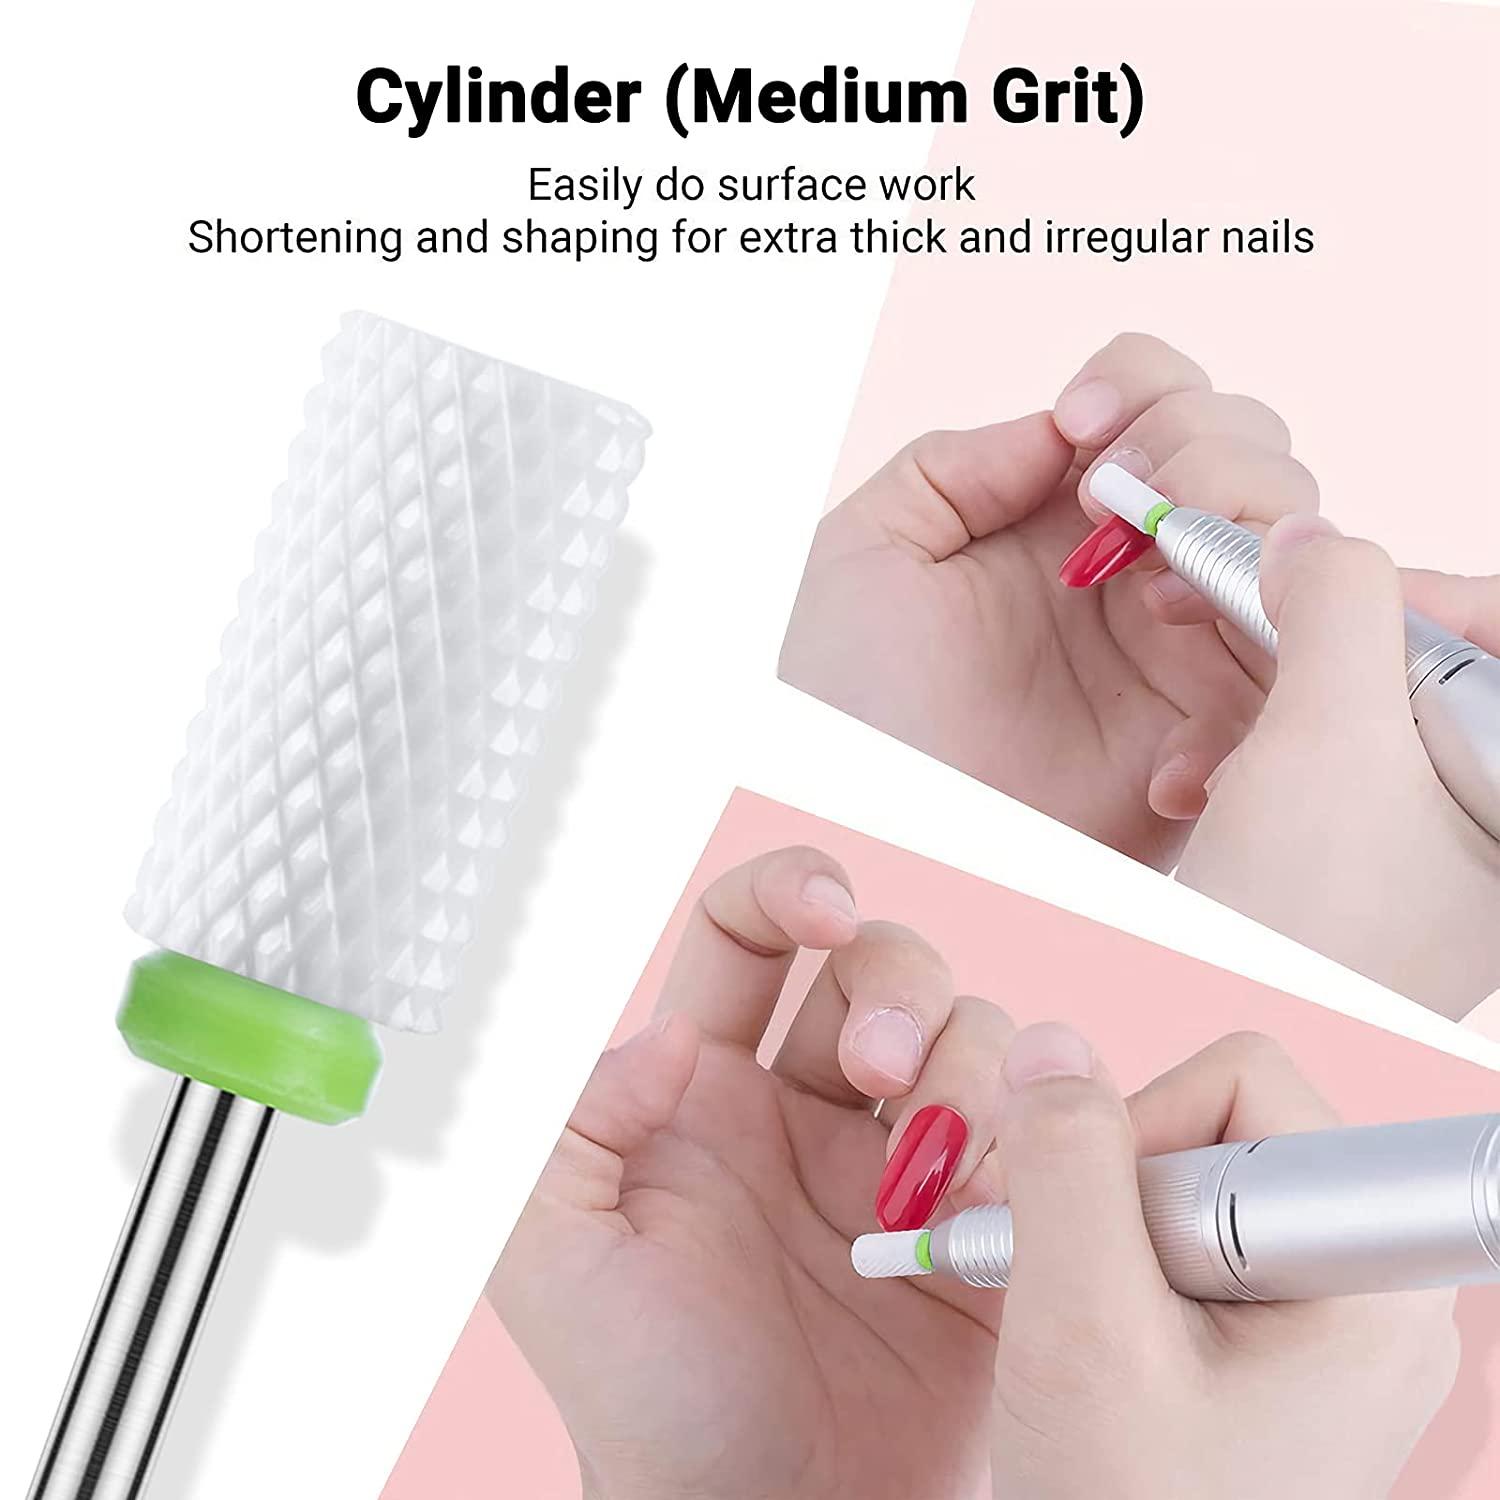 Amazon.com : Nail Drill Bit, Ceramic Nail Drill Bit Electric Manicure  Machine Accessories for Wiping Nail Gel, Pedicure Nail Milling Cutter  Rotary Nail File DIY Nail Design Tool for Personal/Salon (#04) :